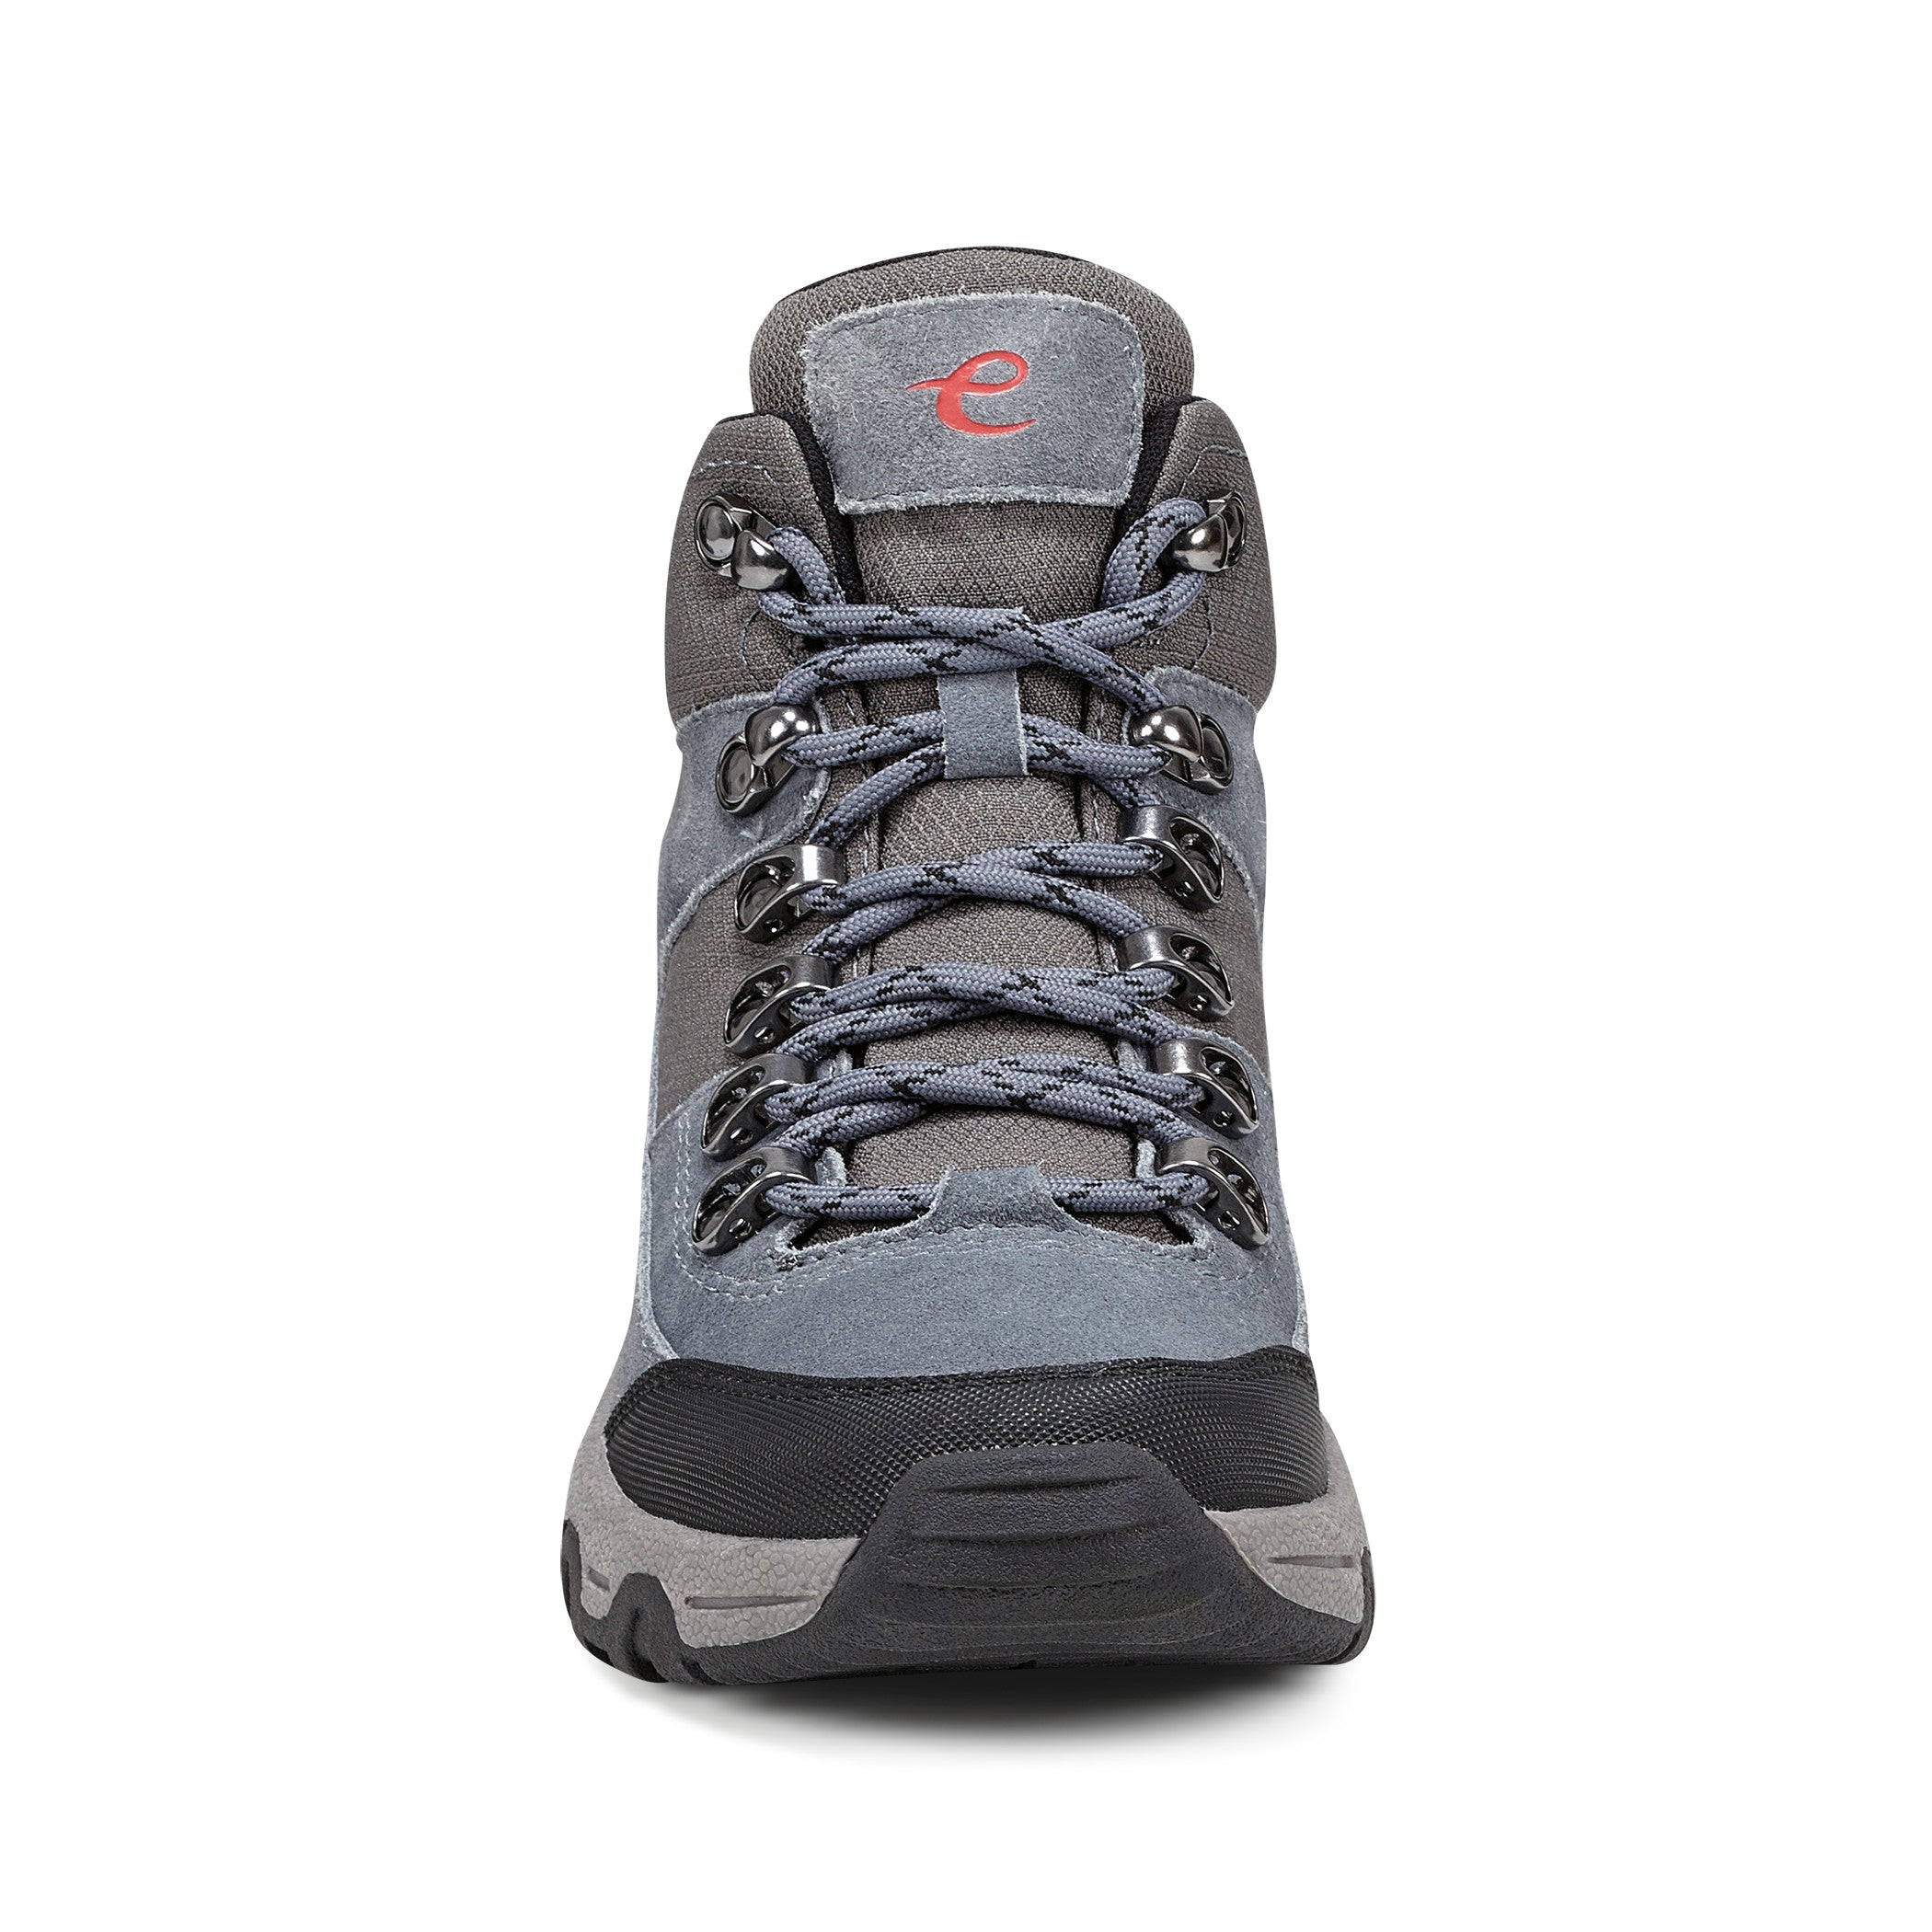 Nylaa Lace Up Hikers